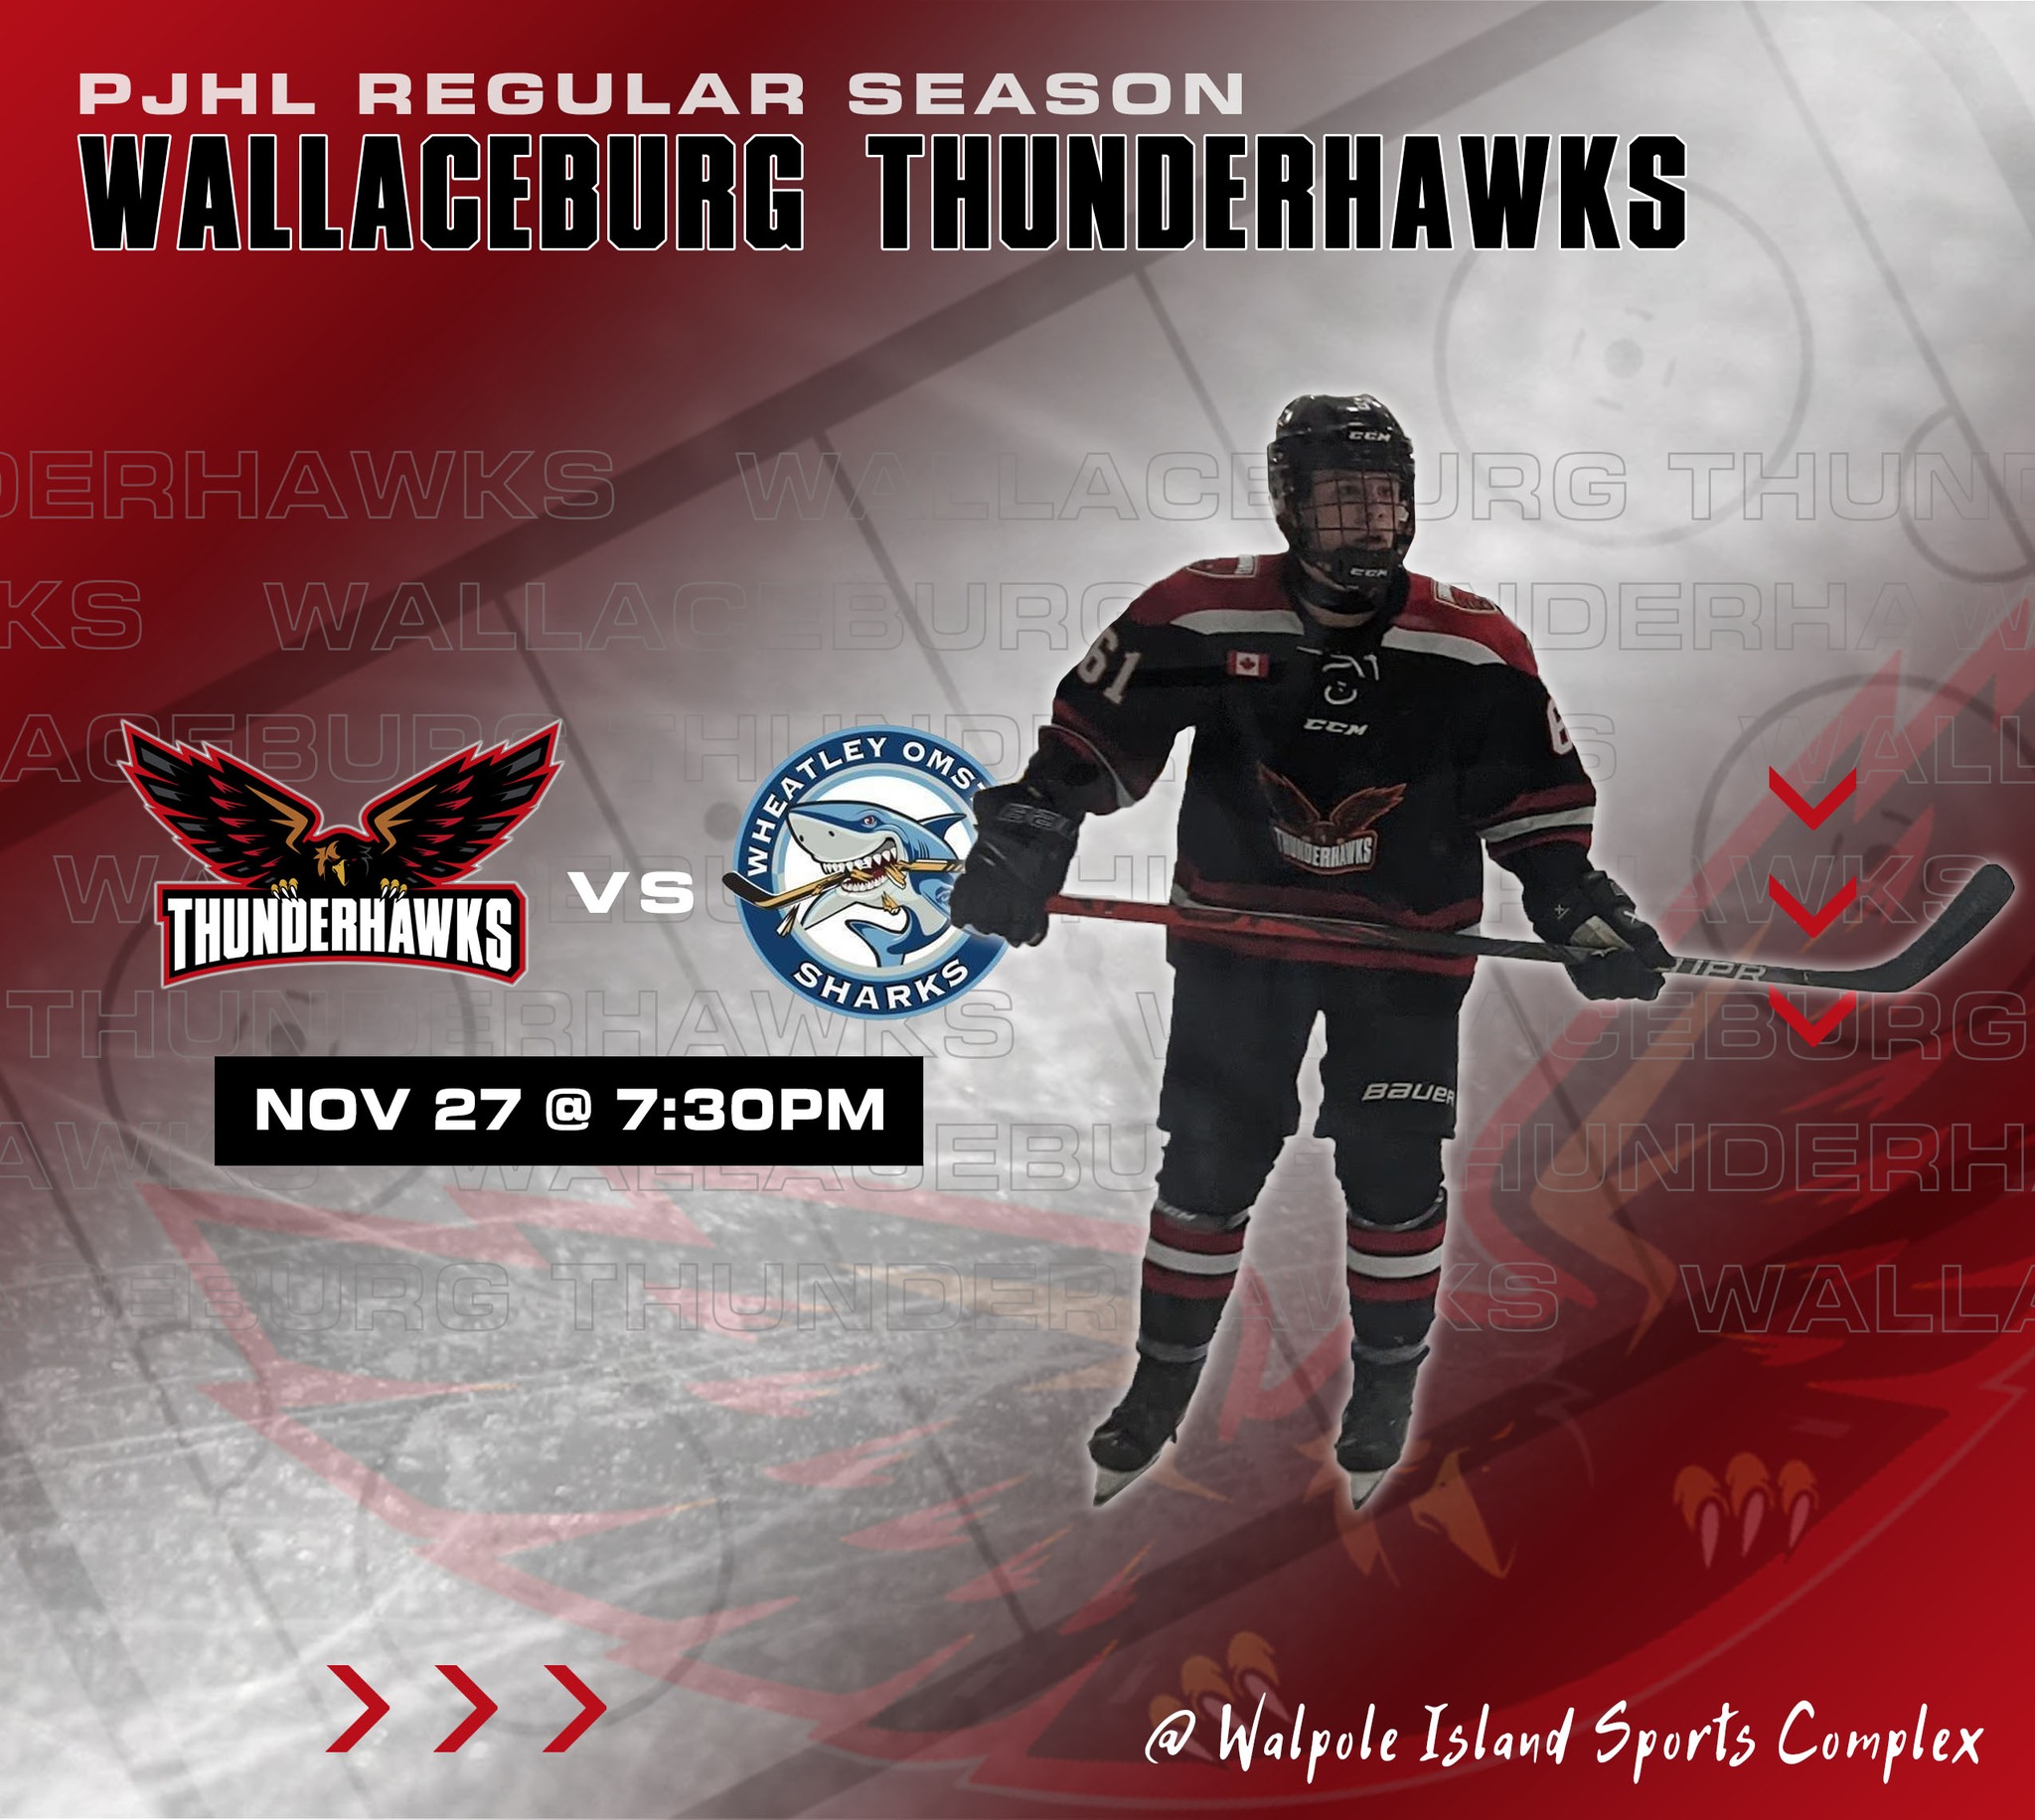 🚨It's GAME DAY!!🚨

Come out and support your Wallaceburg Thunderhawks tonight as they take on the Wheatley Omstead Sharks @ Walpole Island Sports Complex

🏒Puck drops at 7:30pm

#pjhl #hockey #Thunderhawks